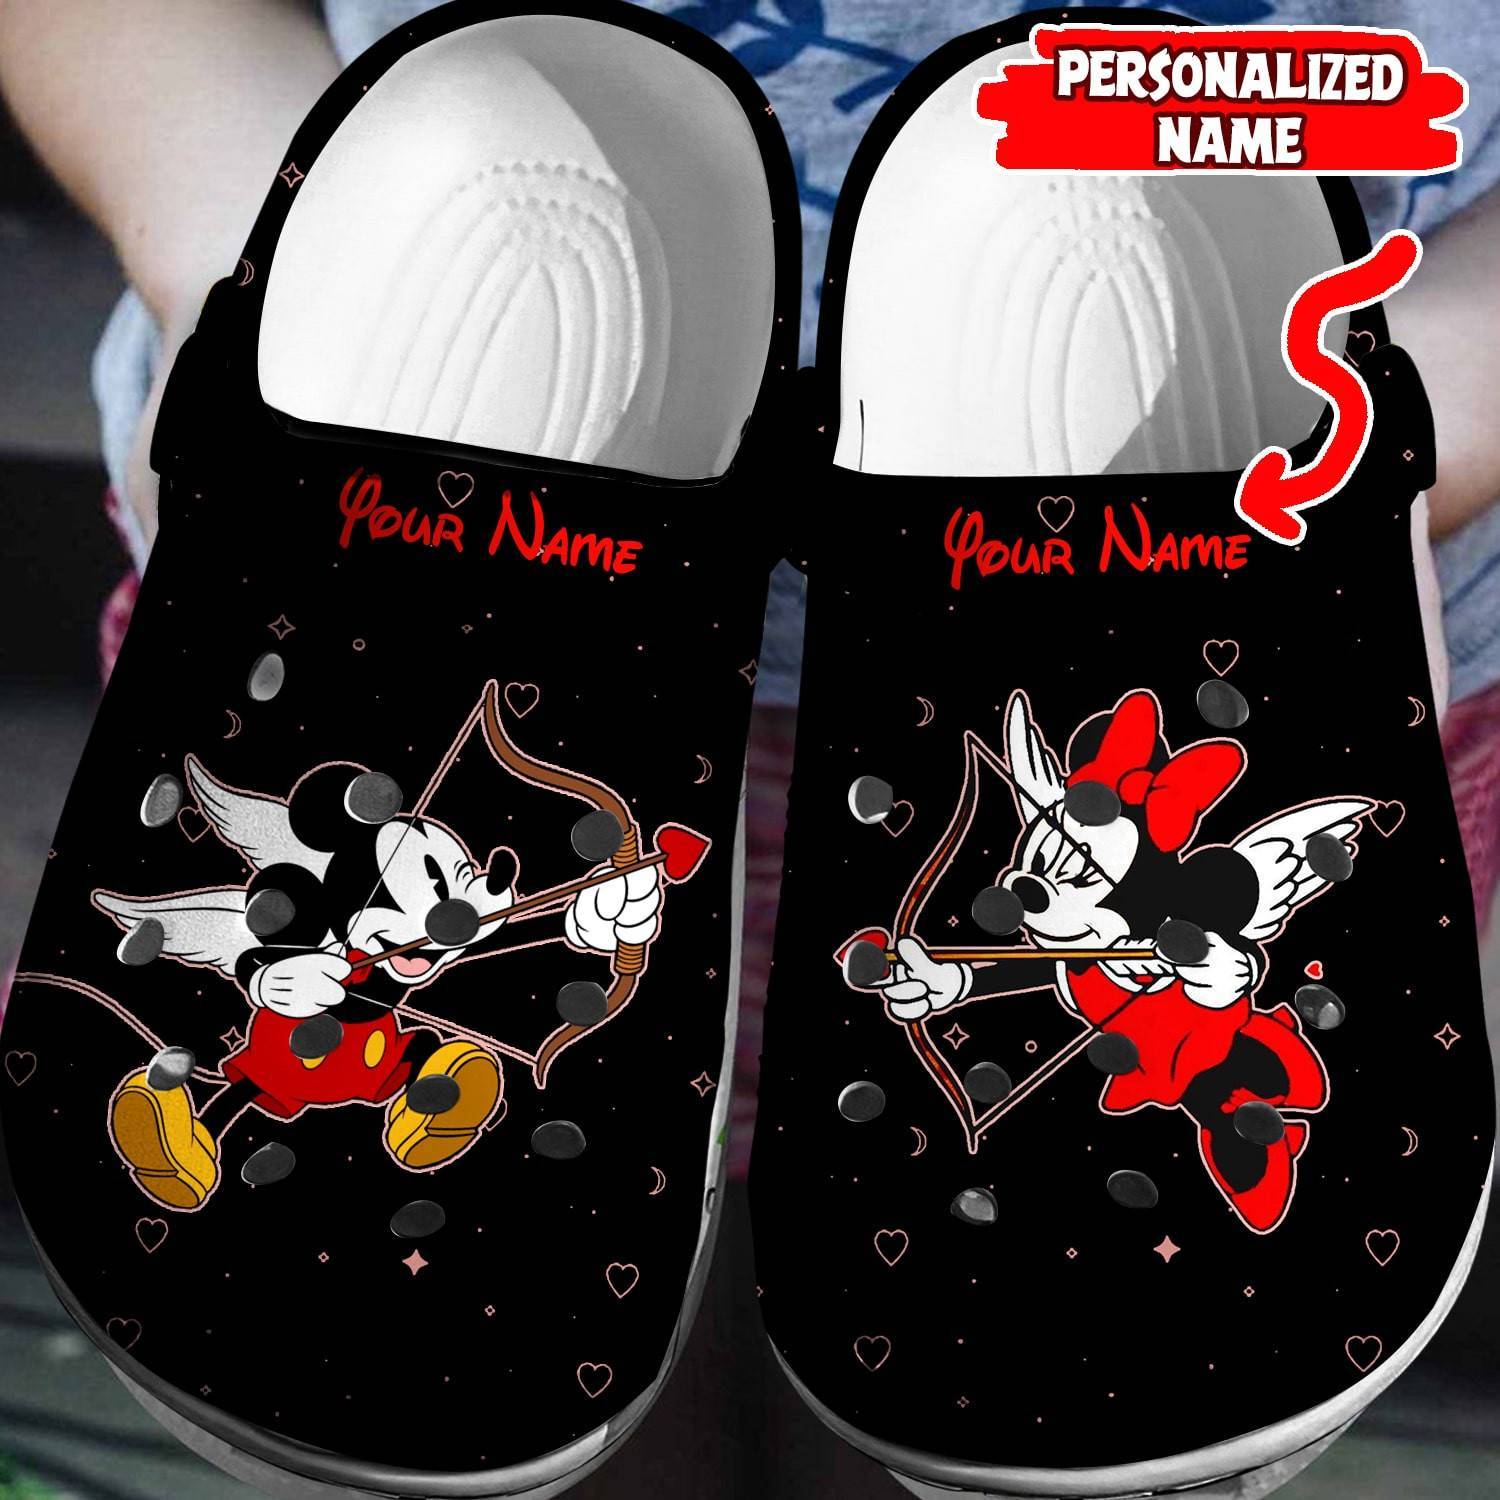 Make a Statement with Personalized Mickey Minnie Crocs 3D Clog Shoes